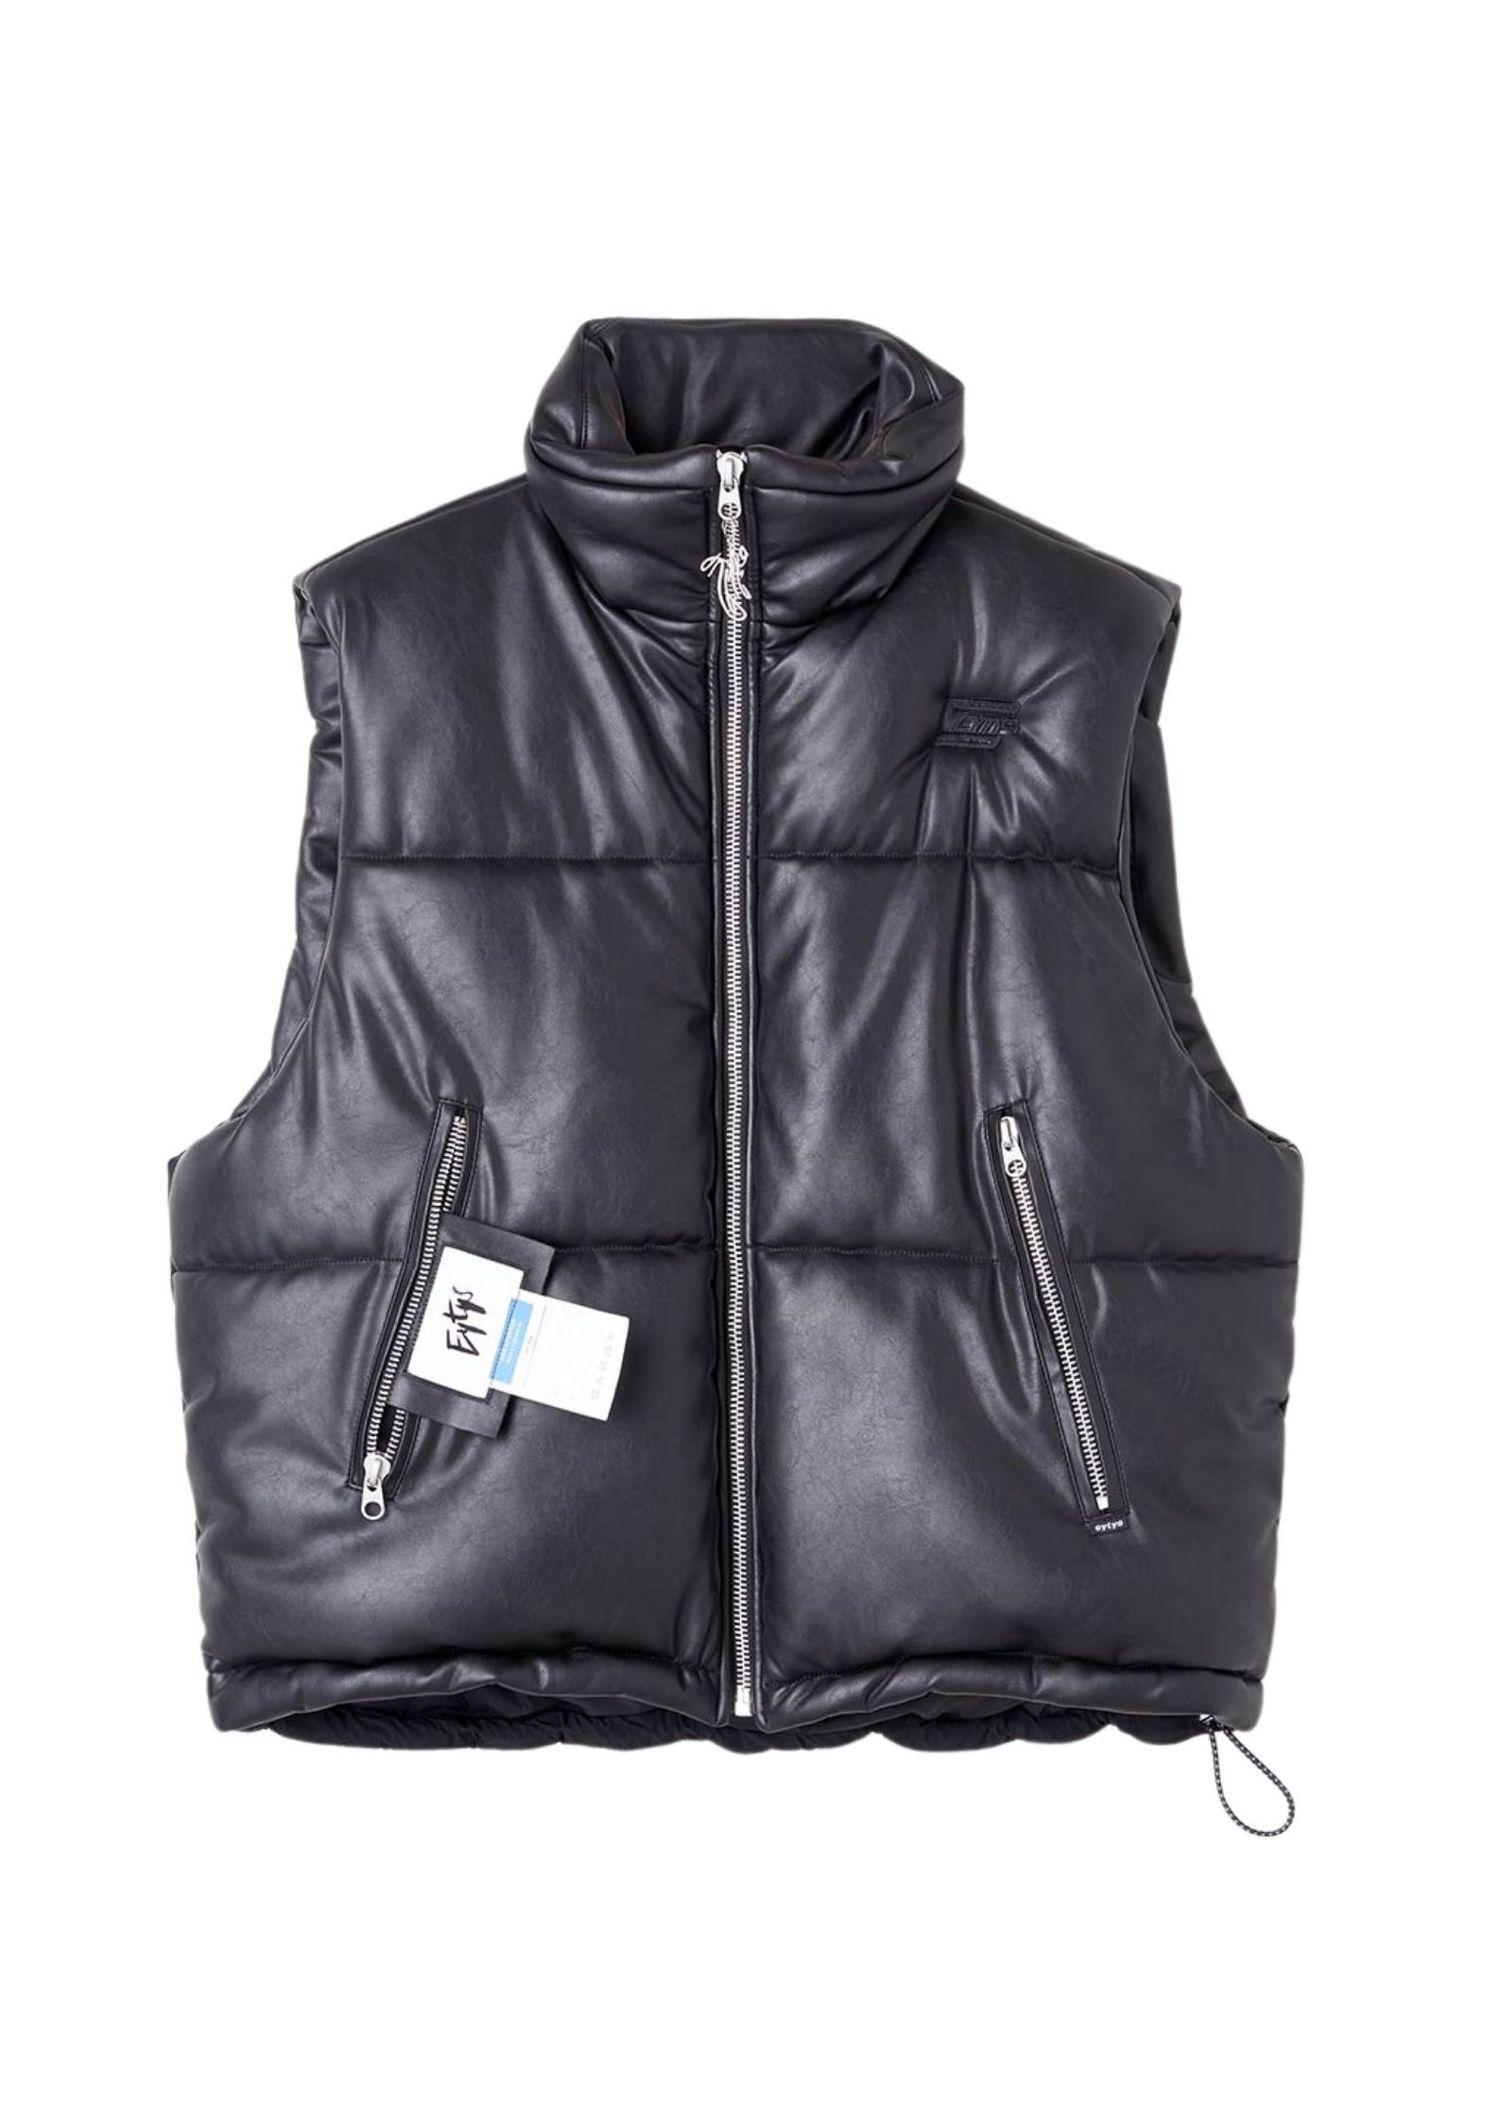 10 puffer vests you should invest in this season - Vogue Scandinavia